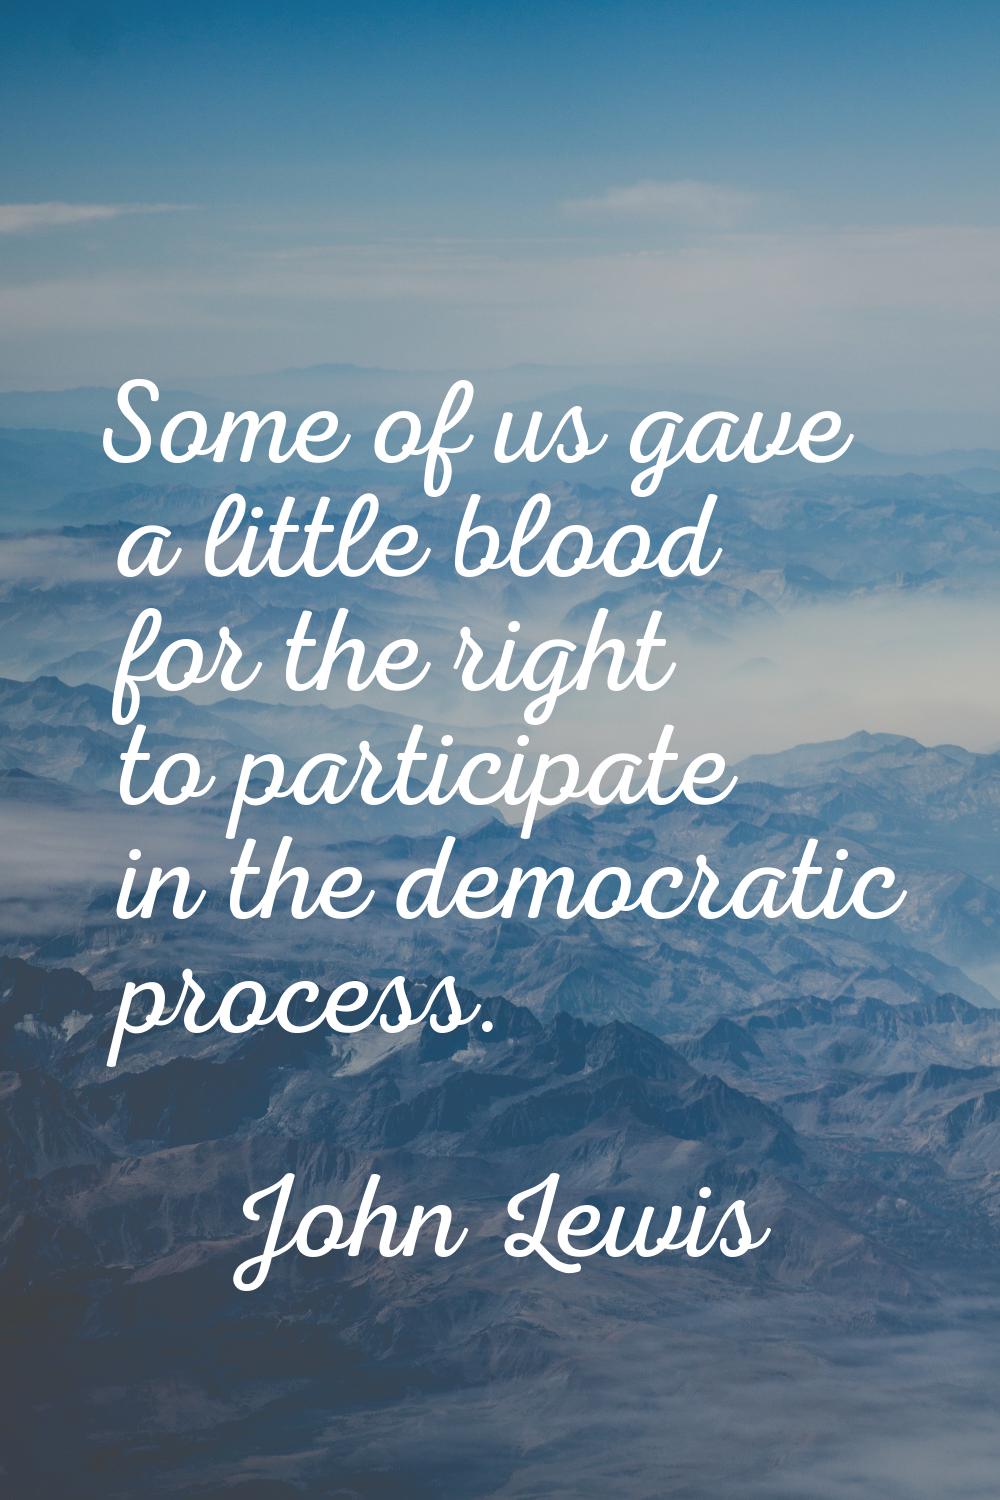 Some of us gave a little blood for the right to participate in the democratic process.